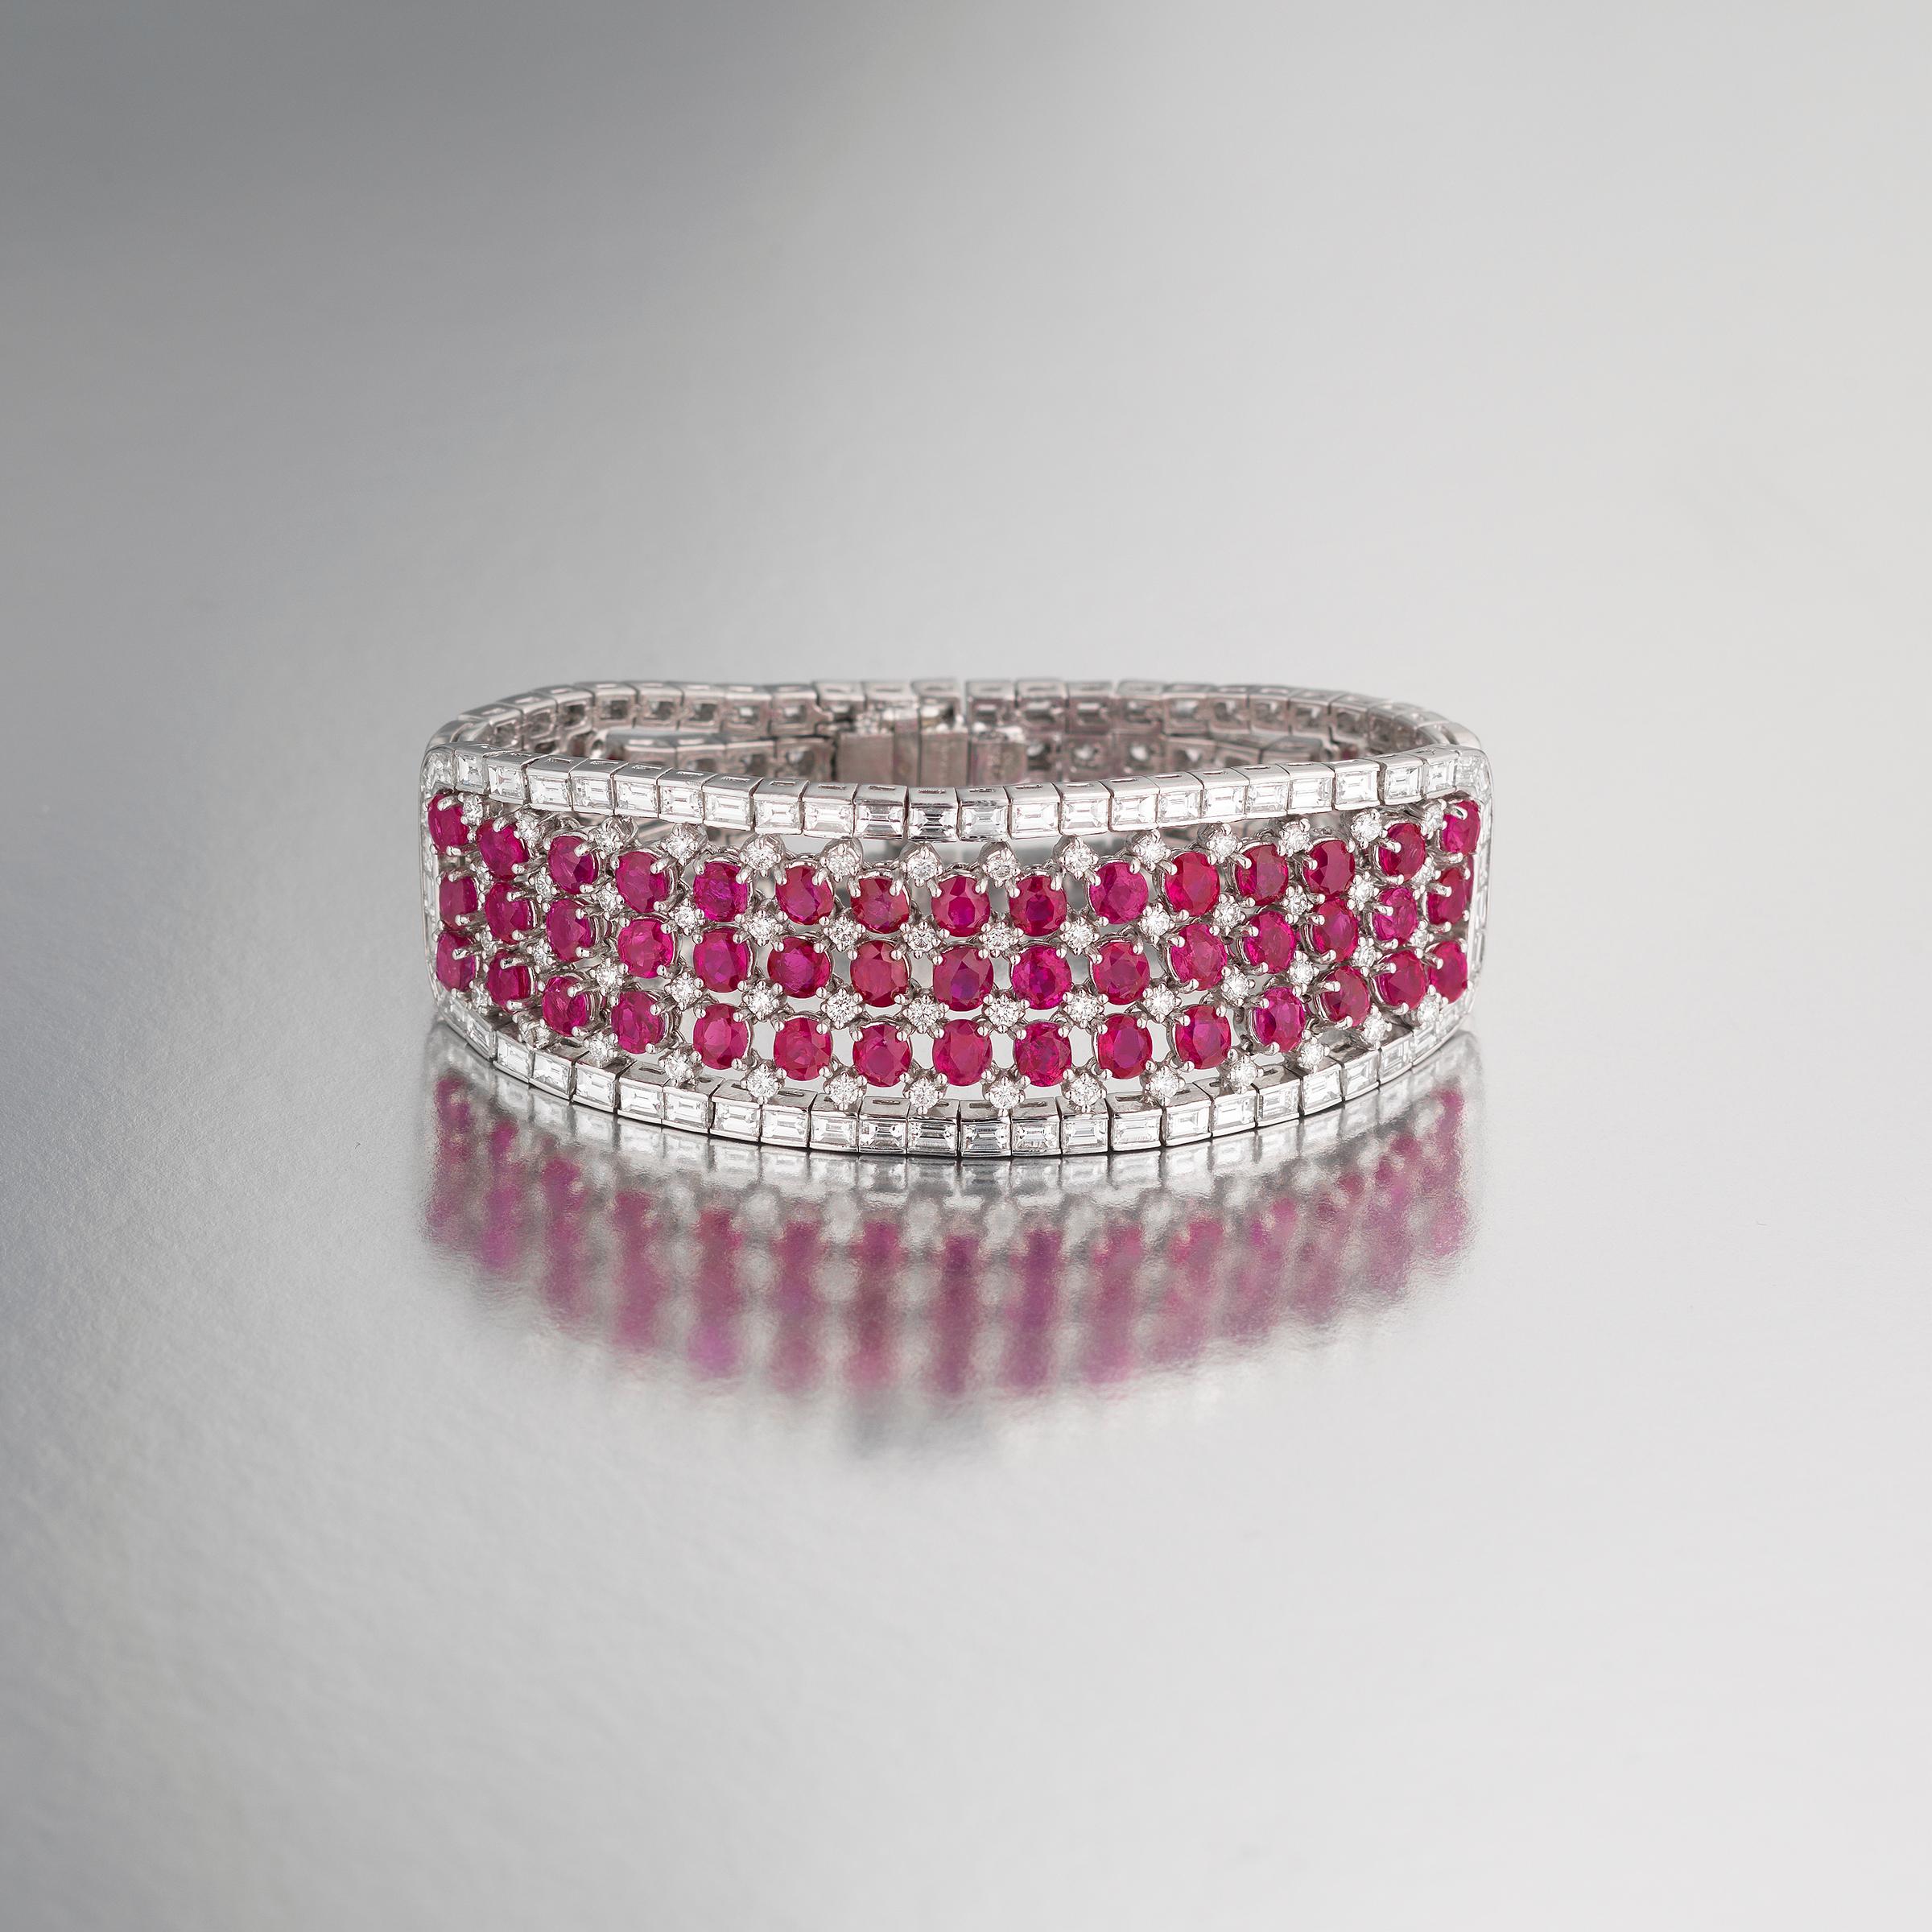 Dazzling Bulgari bracelet crafted in noble platinum and featuring approximately 10 carats of fine white diamonds and 20 carats of vivid red Burma rubies across its three sections. The bracelet radiates with red-carpet glamour of Bulgari high-jewelry